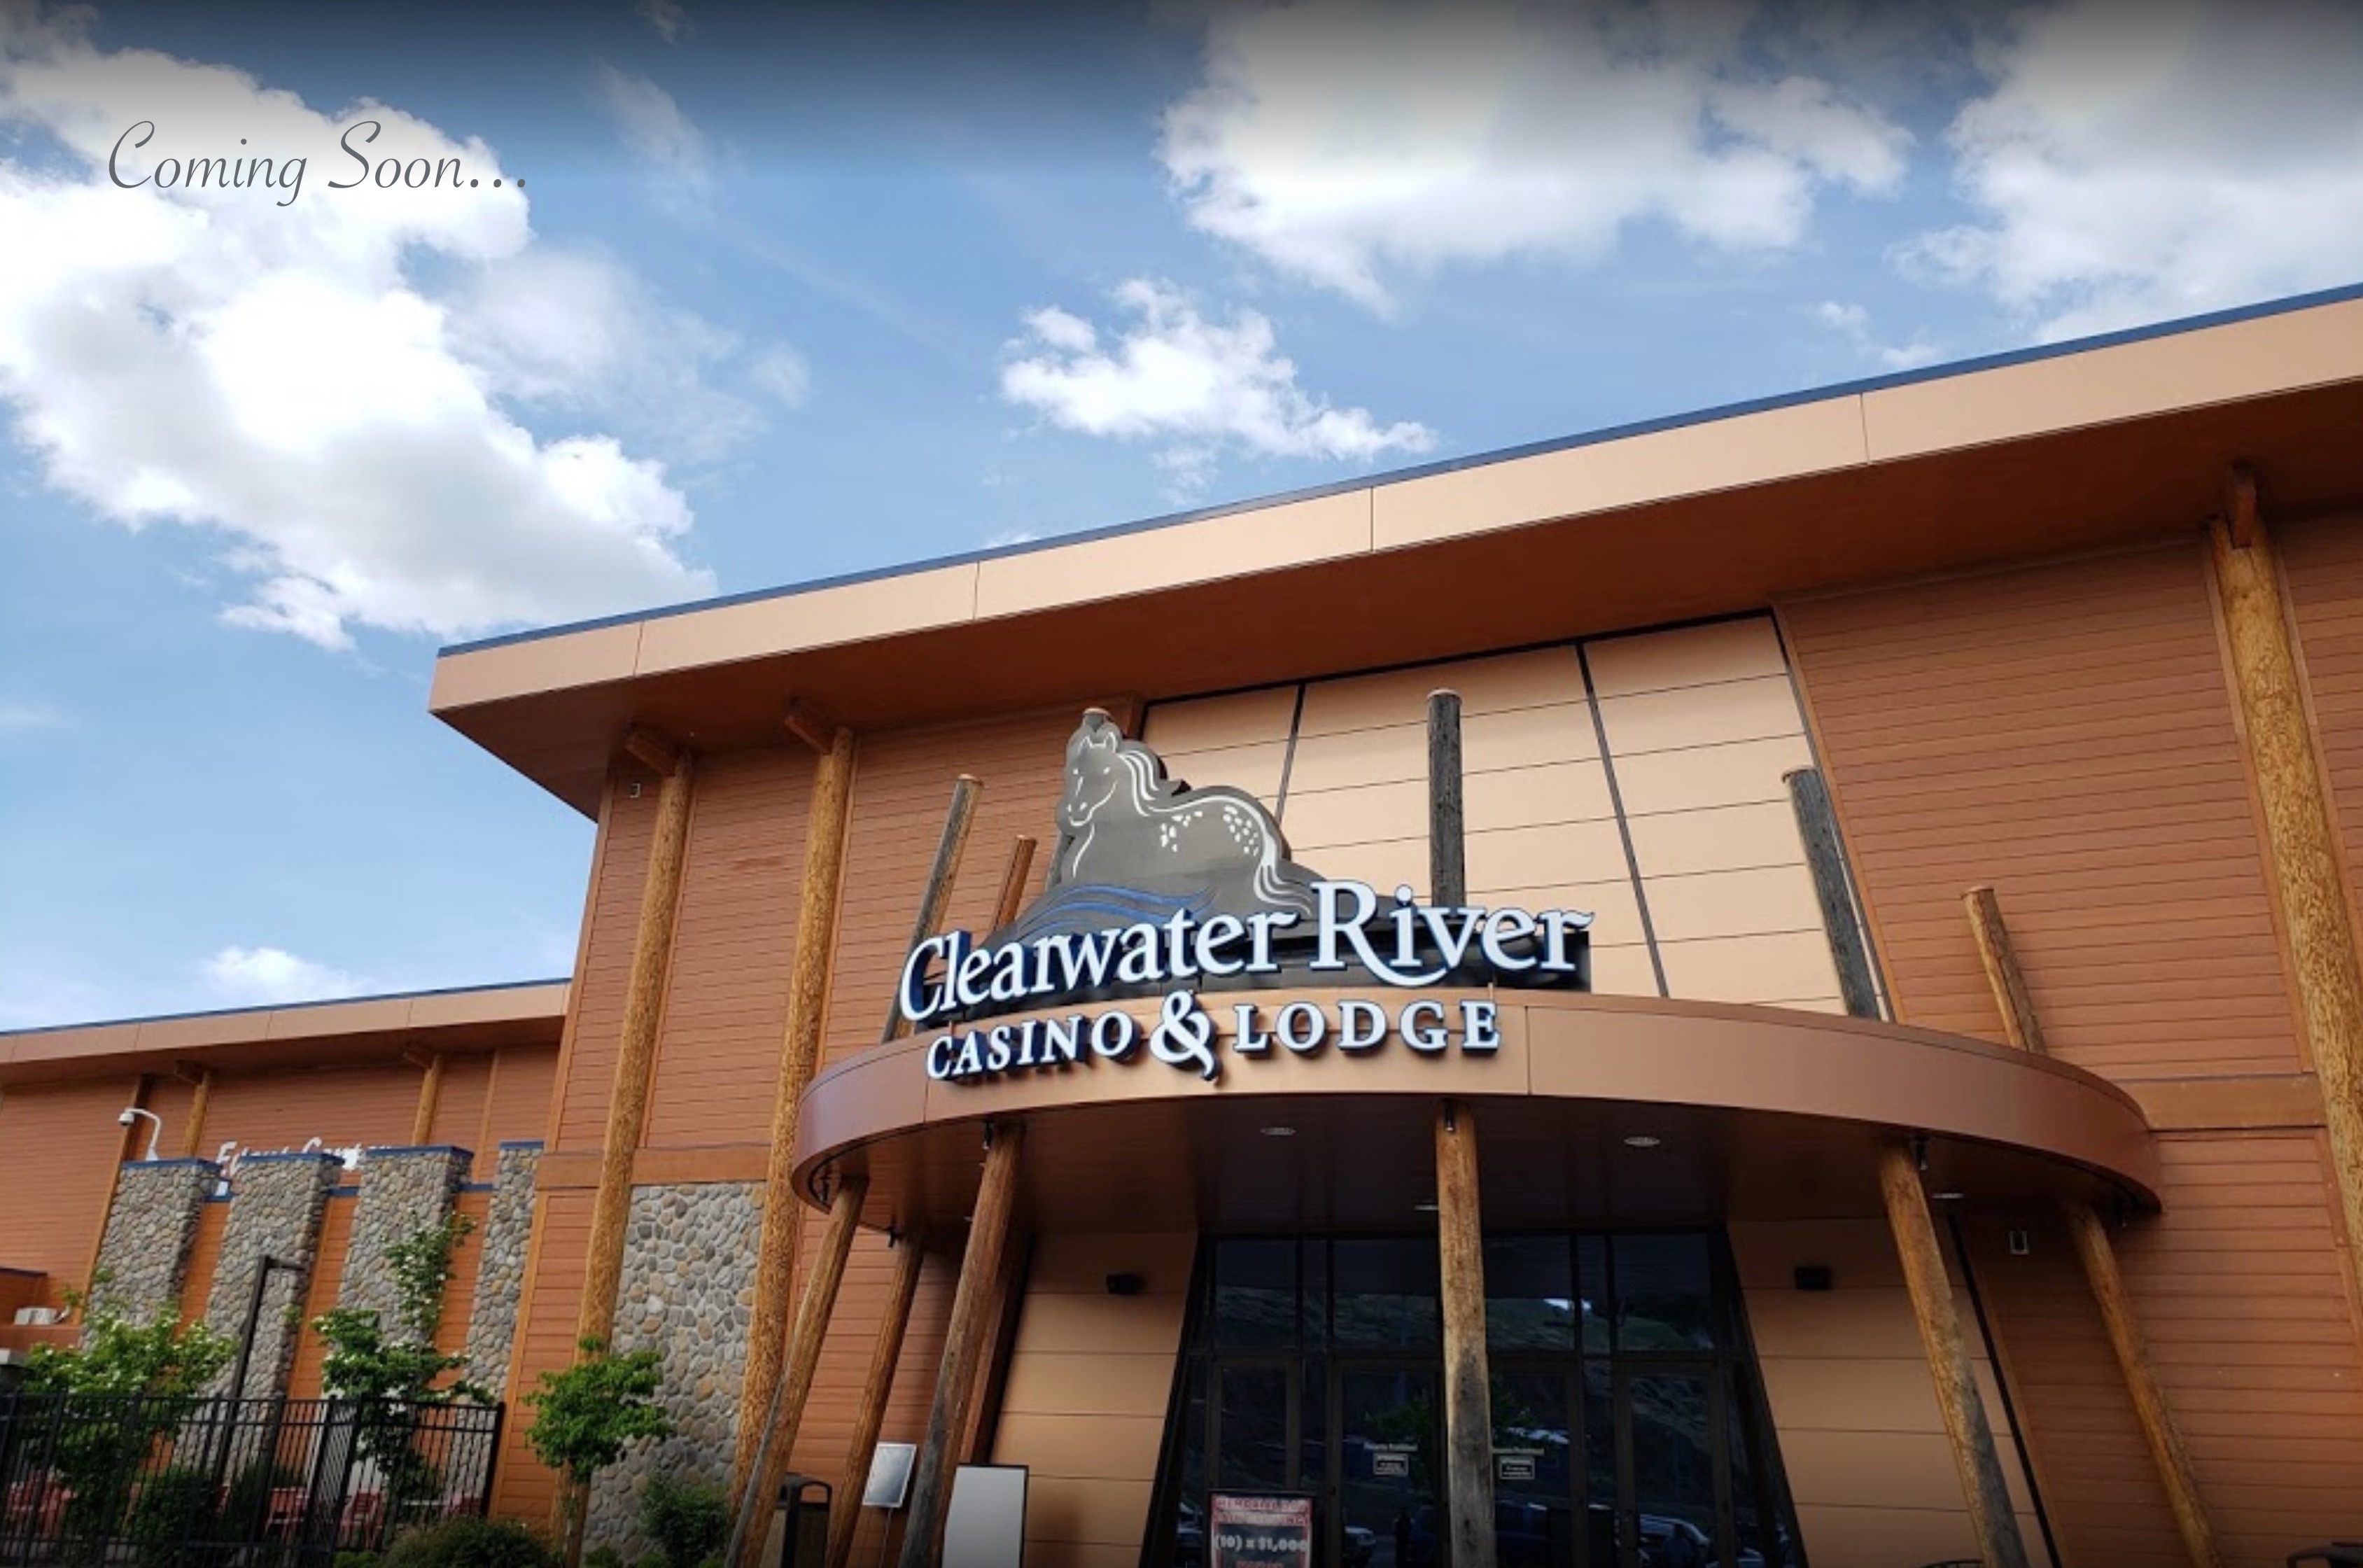 Clearwater River Casino & Lodge Chooses Casino Air Technology…